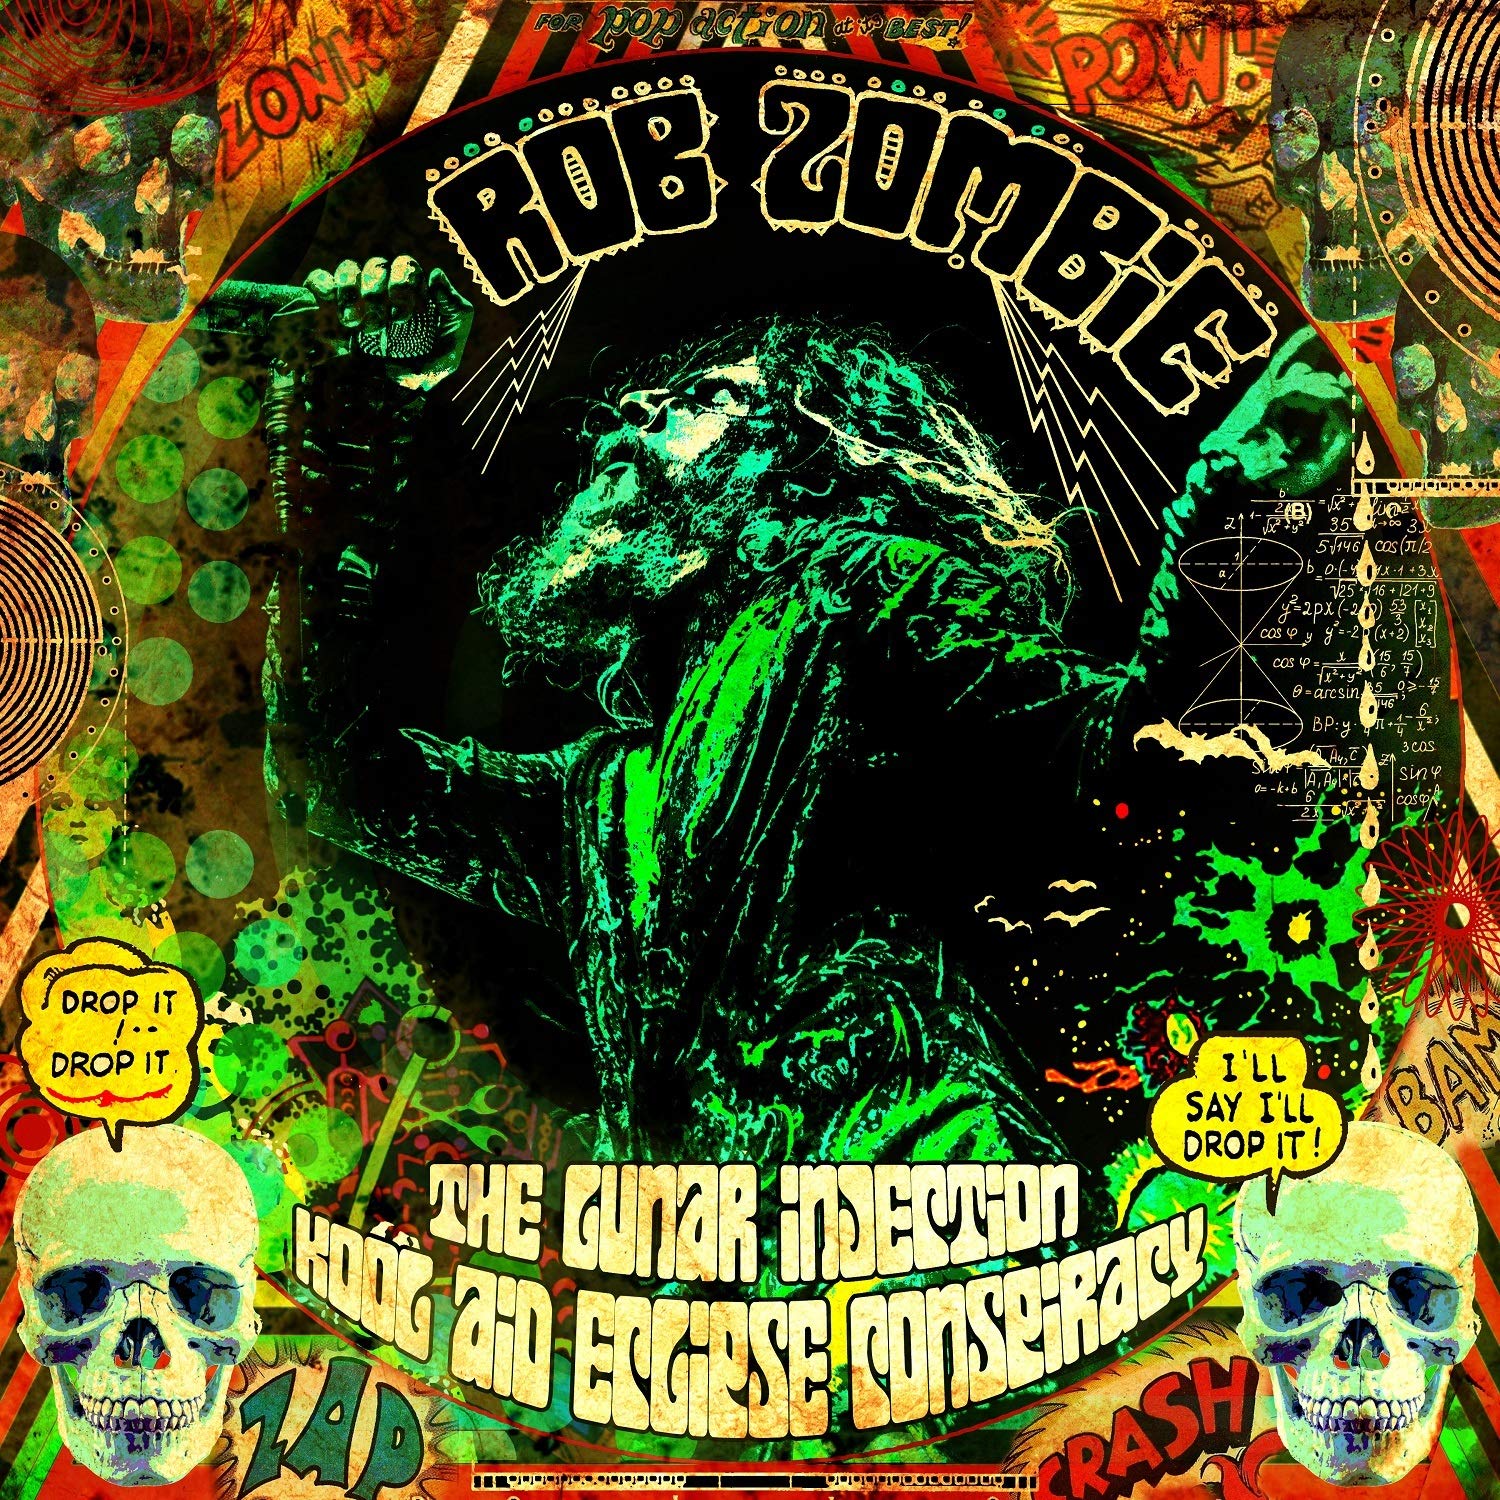 Rob Zombie – The lunar injection kool aid eclipse conspiracy